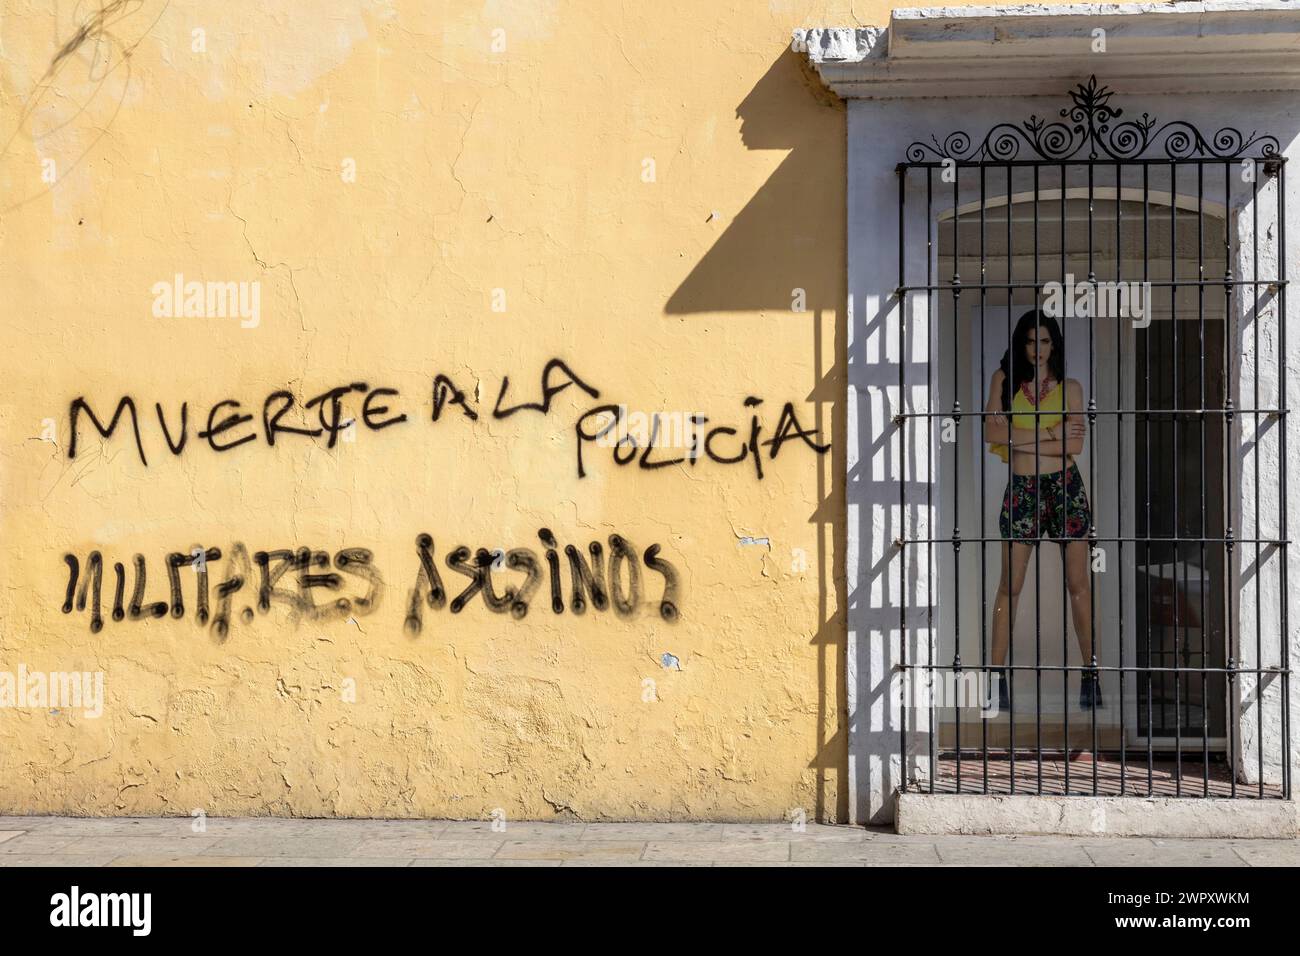 Oaxaca, Mexico - The wall of a store is adorned with anti-police graffiti. Stock Photo